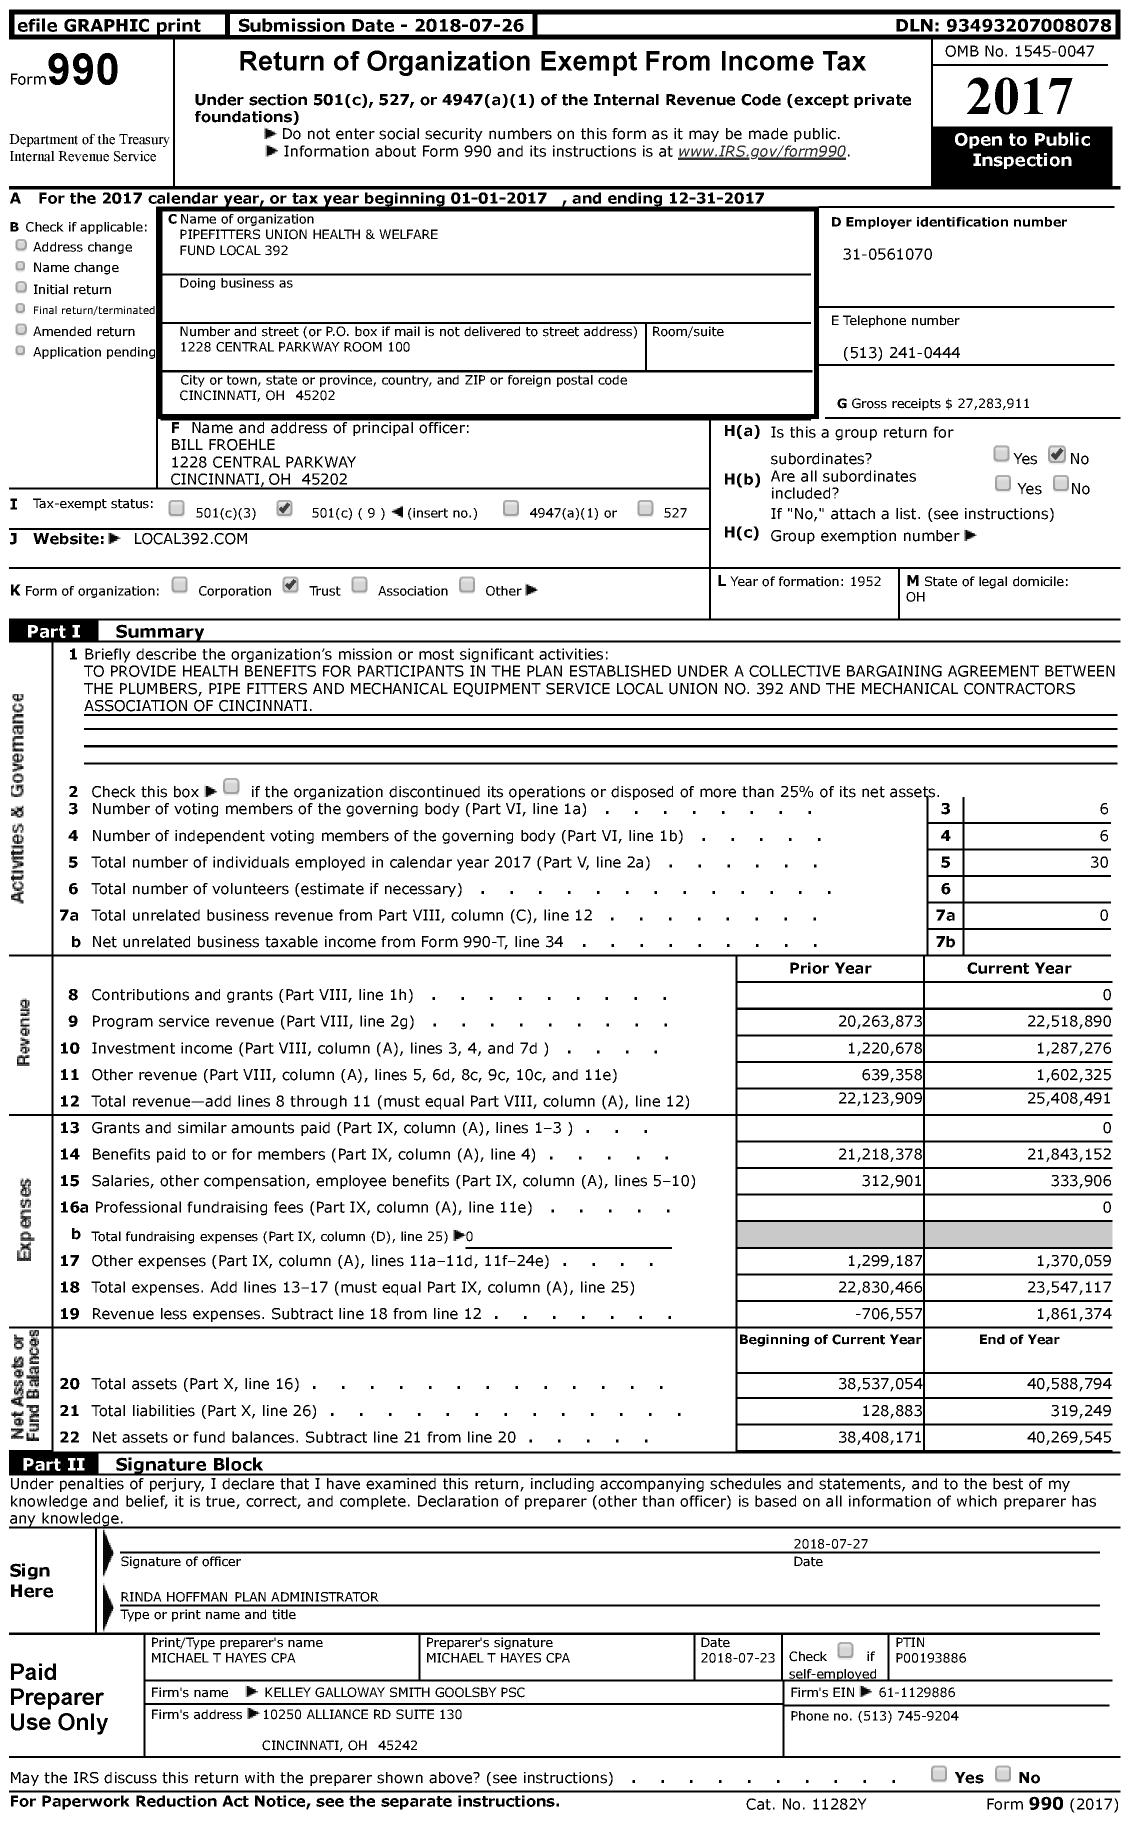 Image of first page of 2017 Form 990 for Pipefitters Union Health and Welfare Fund Local 392